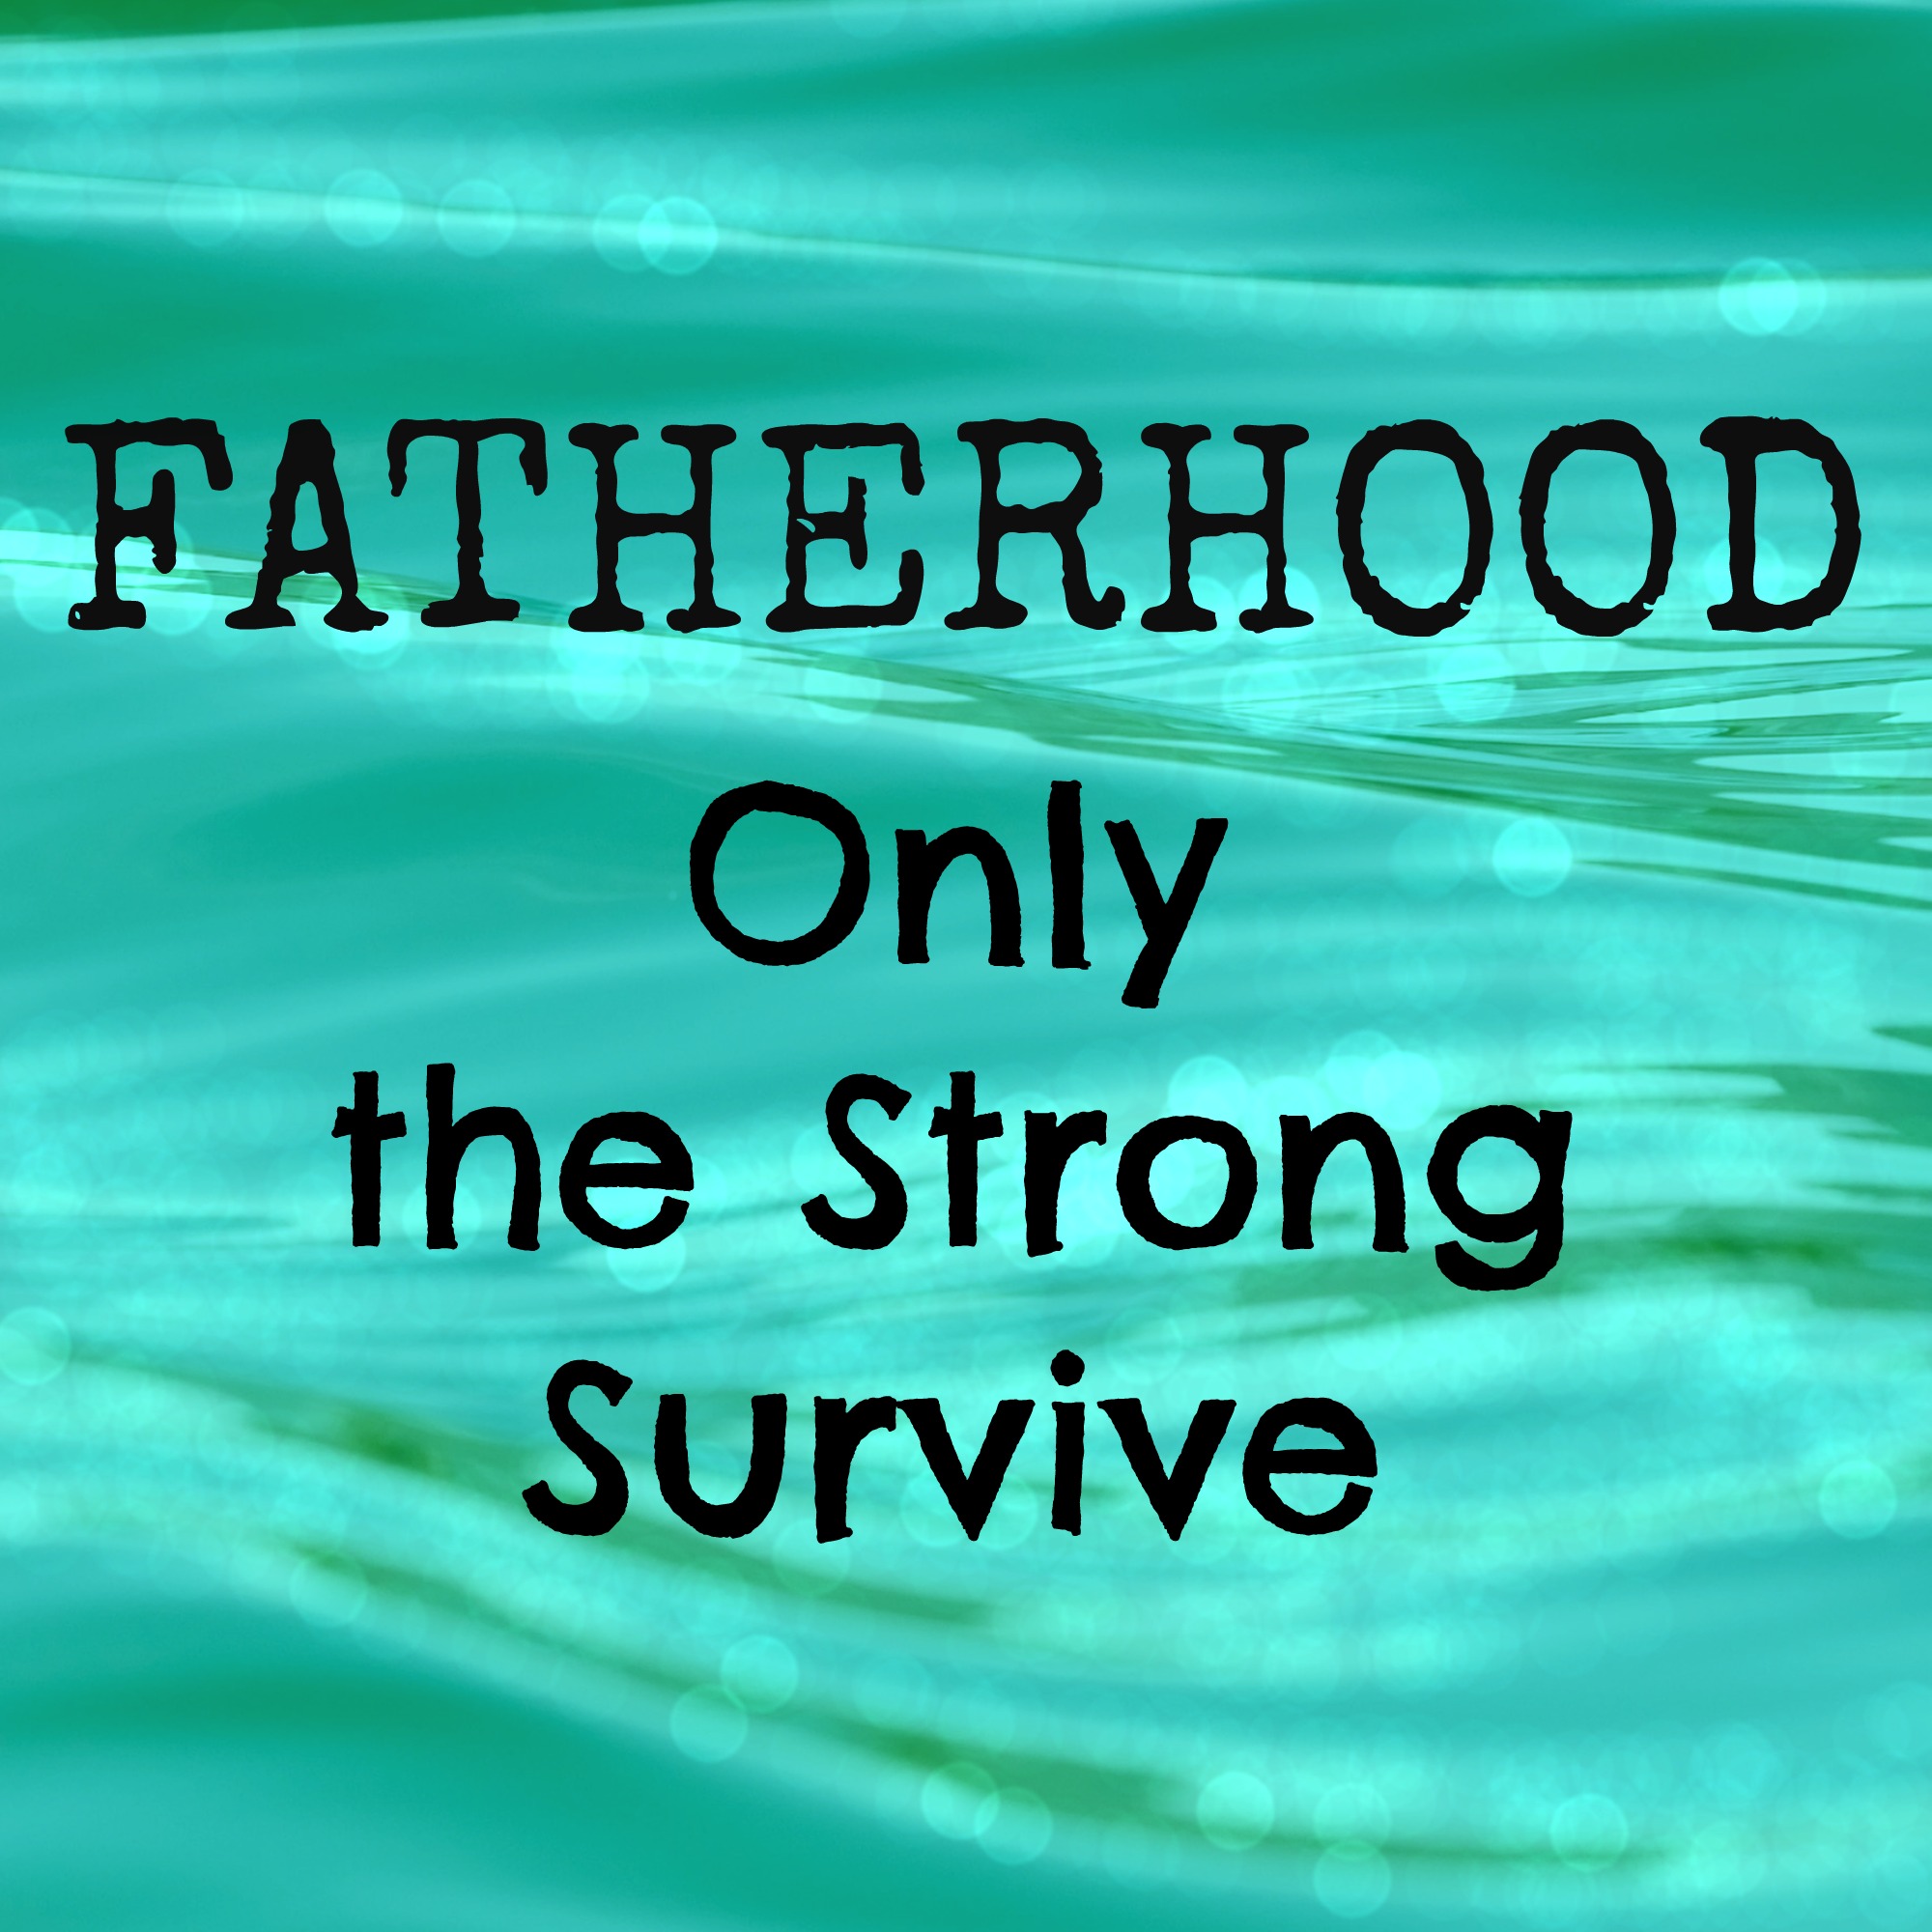 Fatherhood: Only the Strong Survive